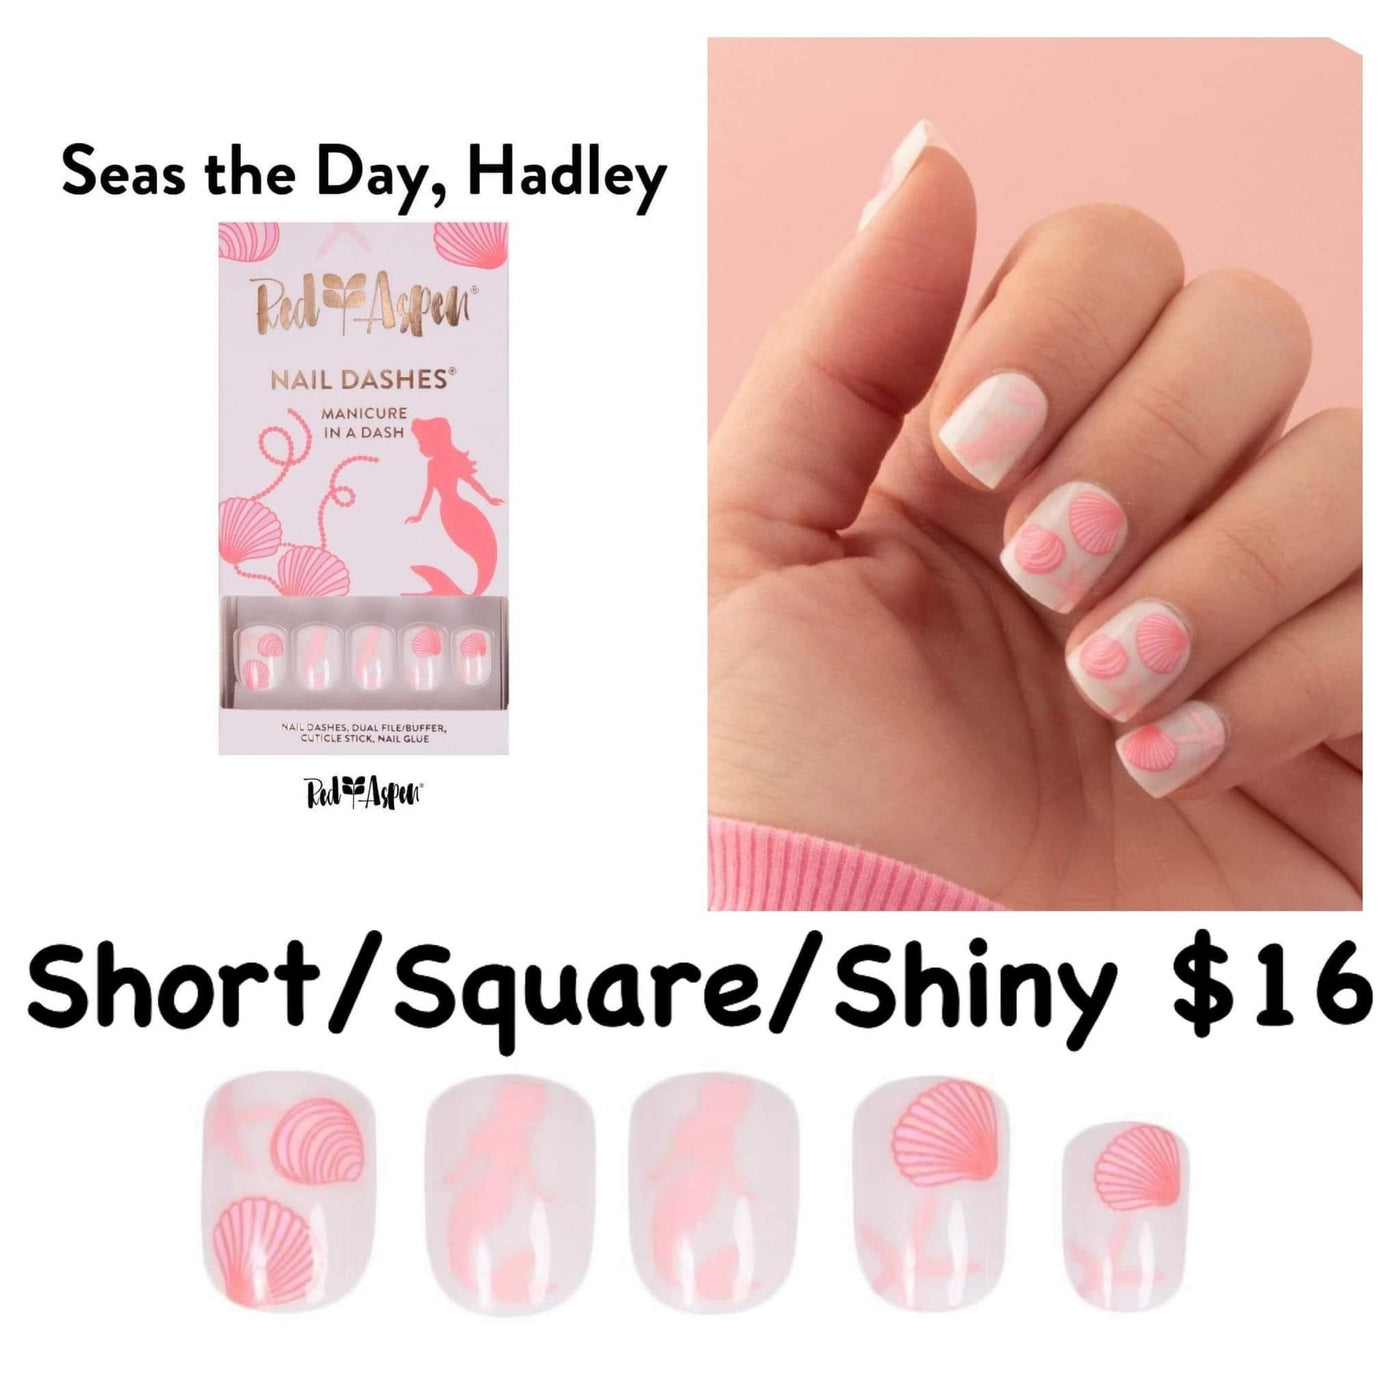 Red Aspen Nail Dashes [Seas the Day, Hadley]